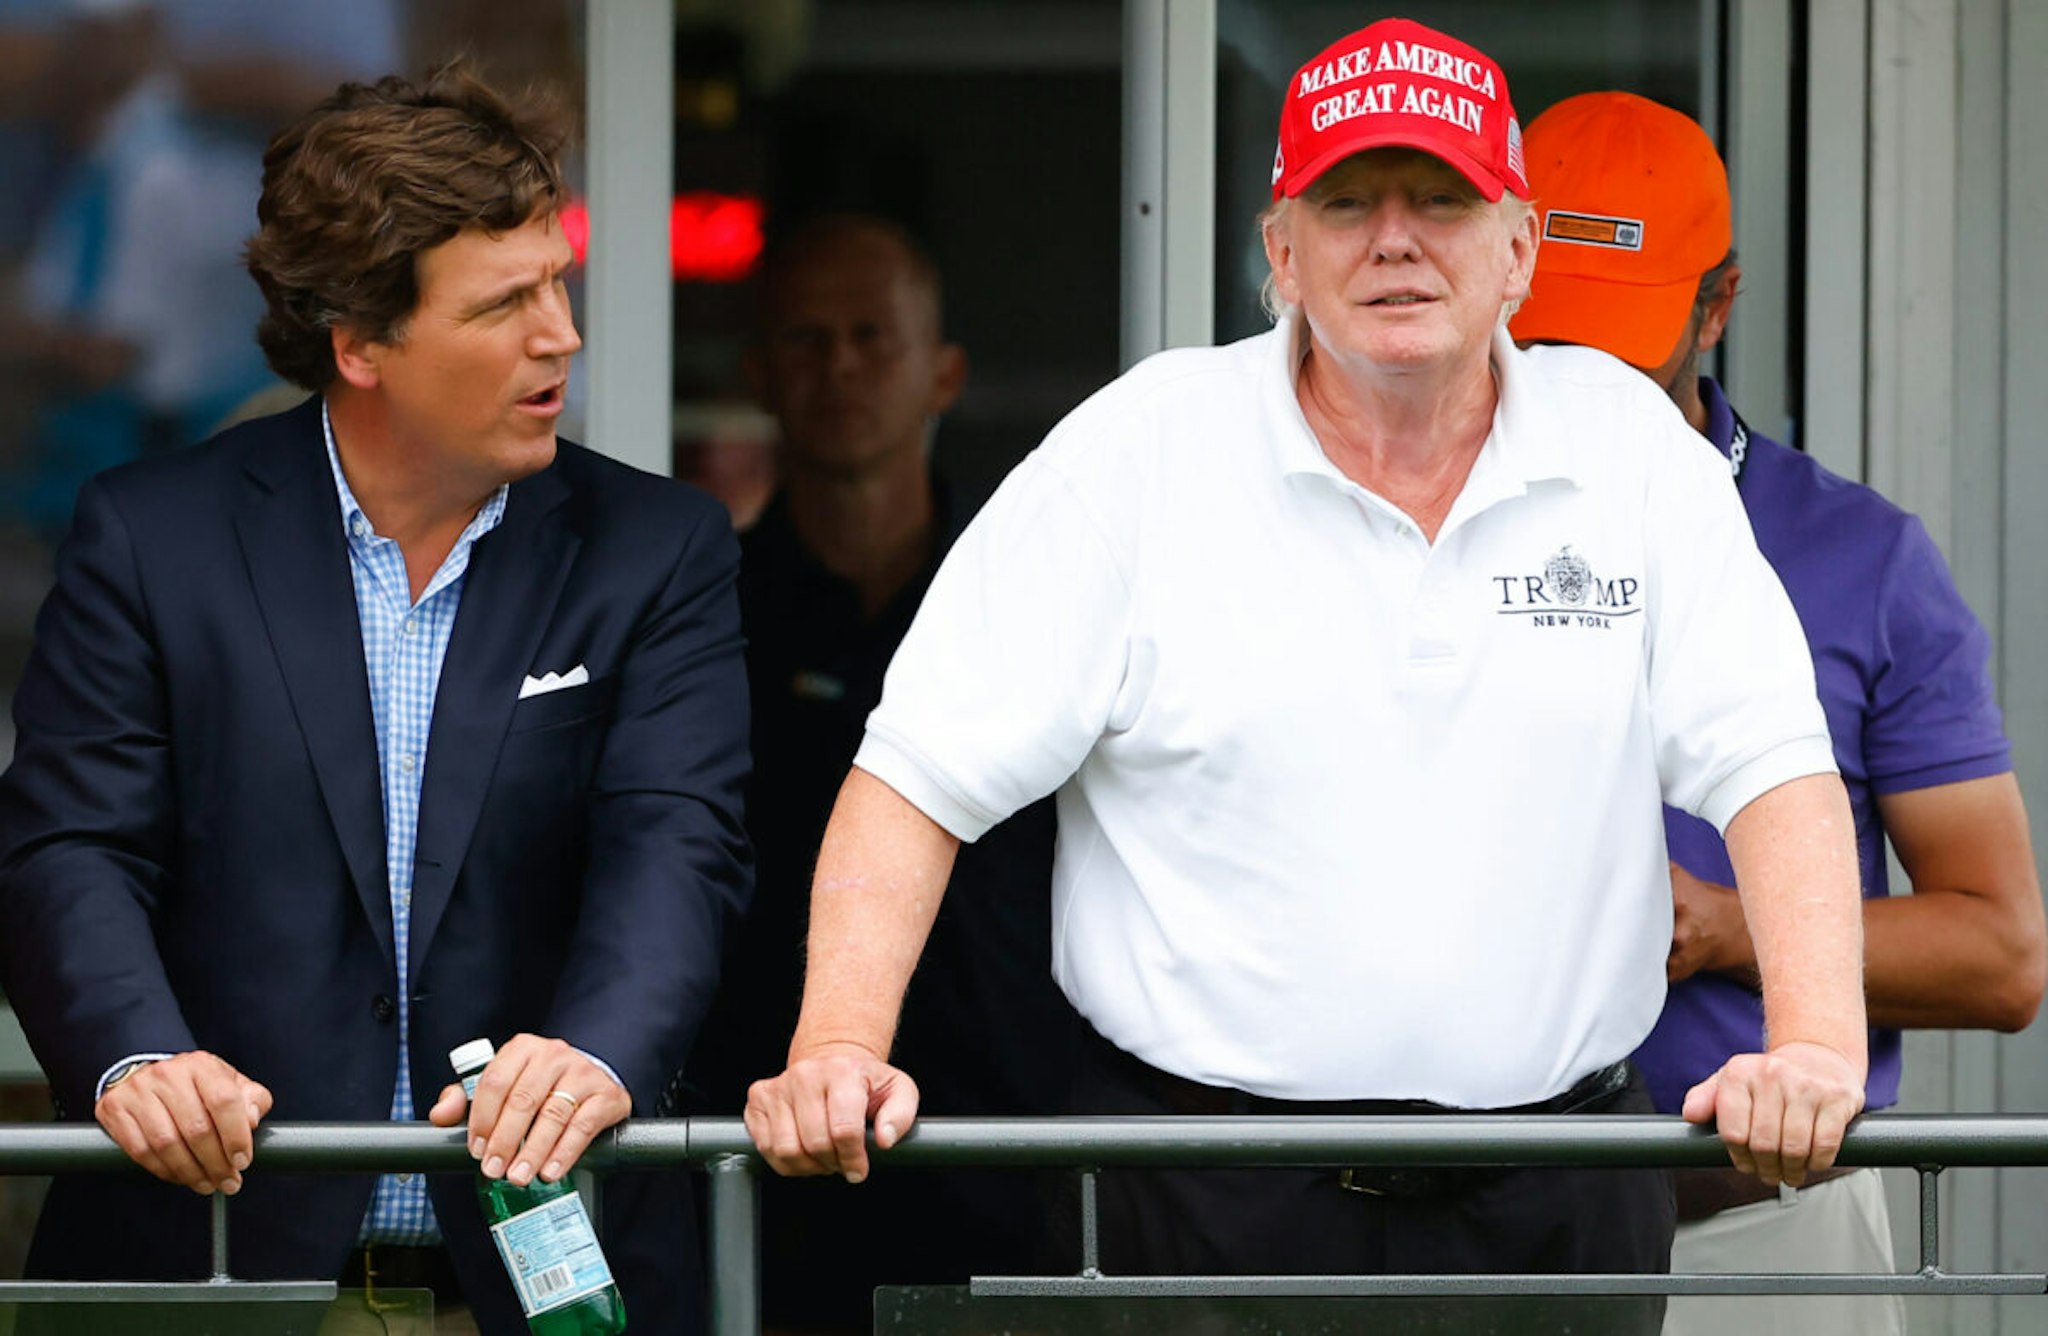 BEDMINSTER, NJ - JULY 31: Former President Donald Trump, Tucker Carlson and Marjorie Taylor Greene during the 3rd round of the LIV Golf Invitational Series Bedminster on July 31, 2022 at Trump National Golf Club in Bedminster, New Jersey.